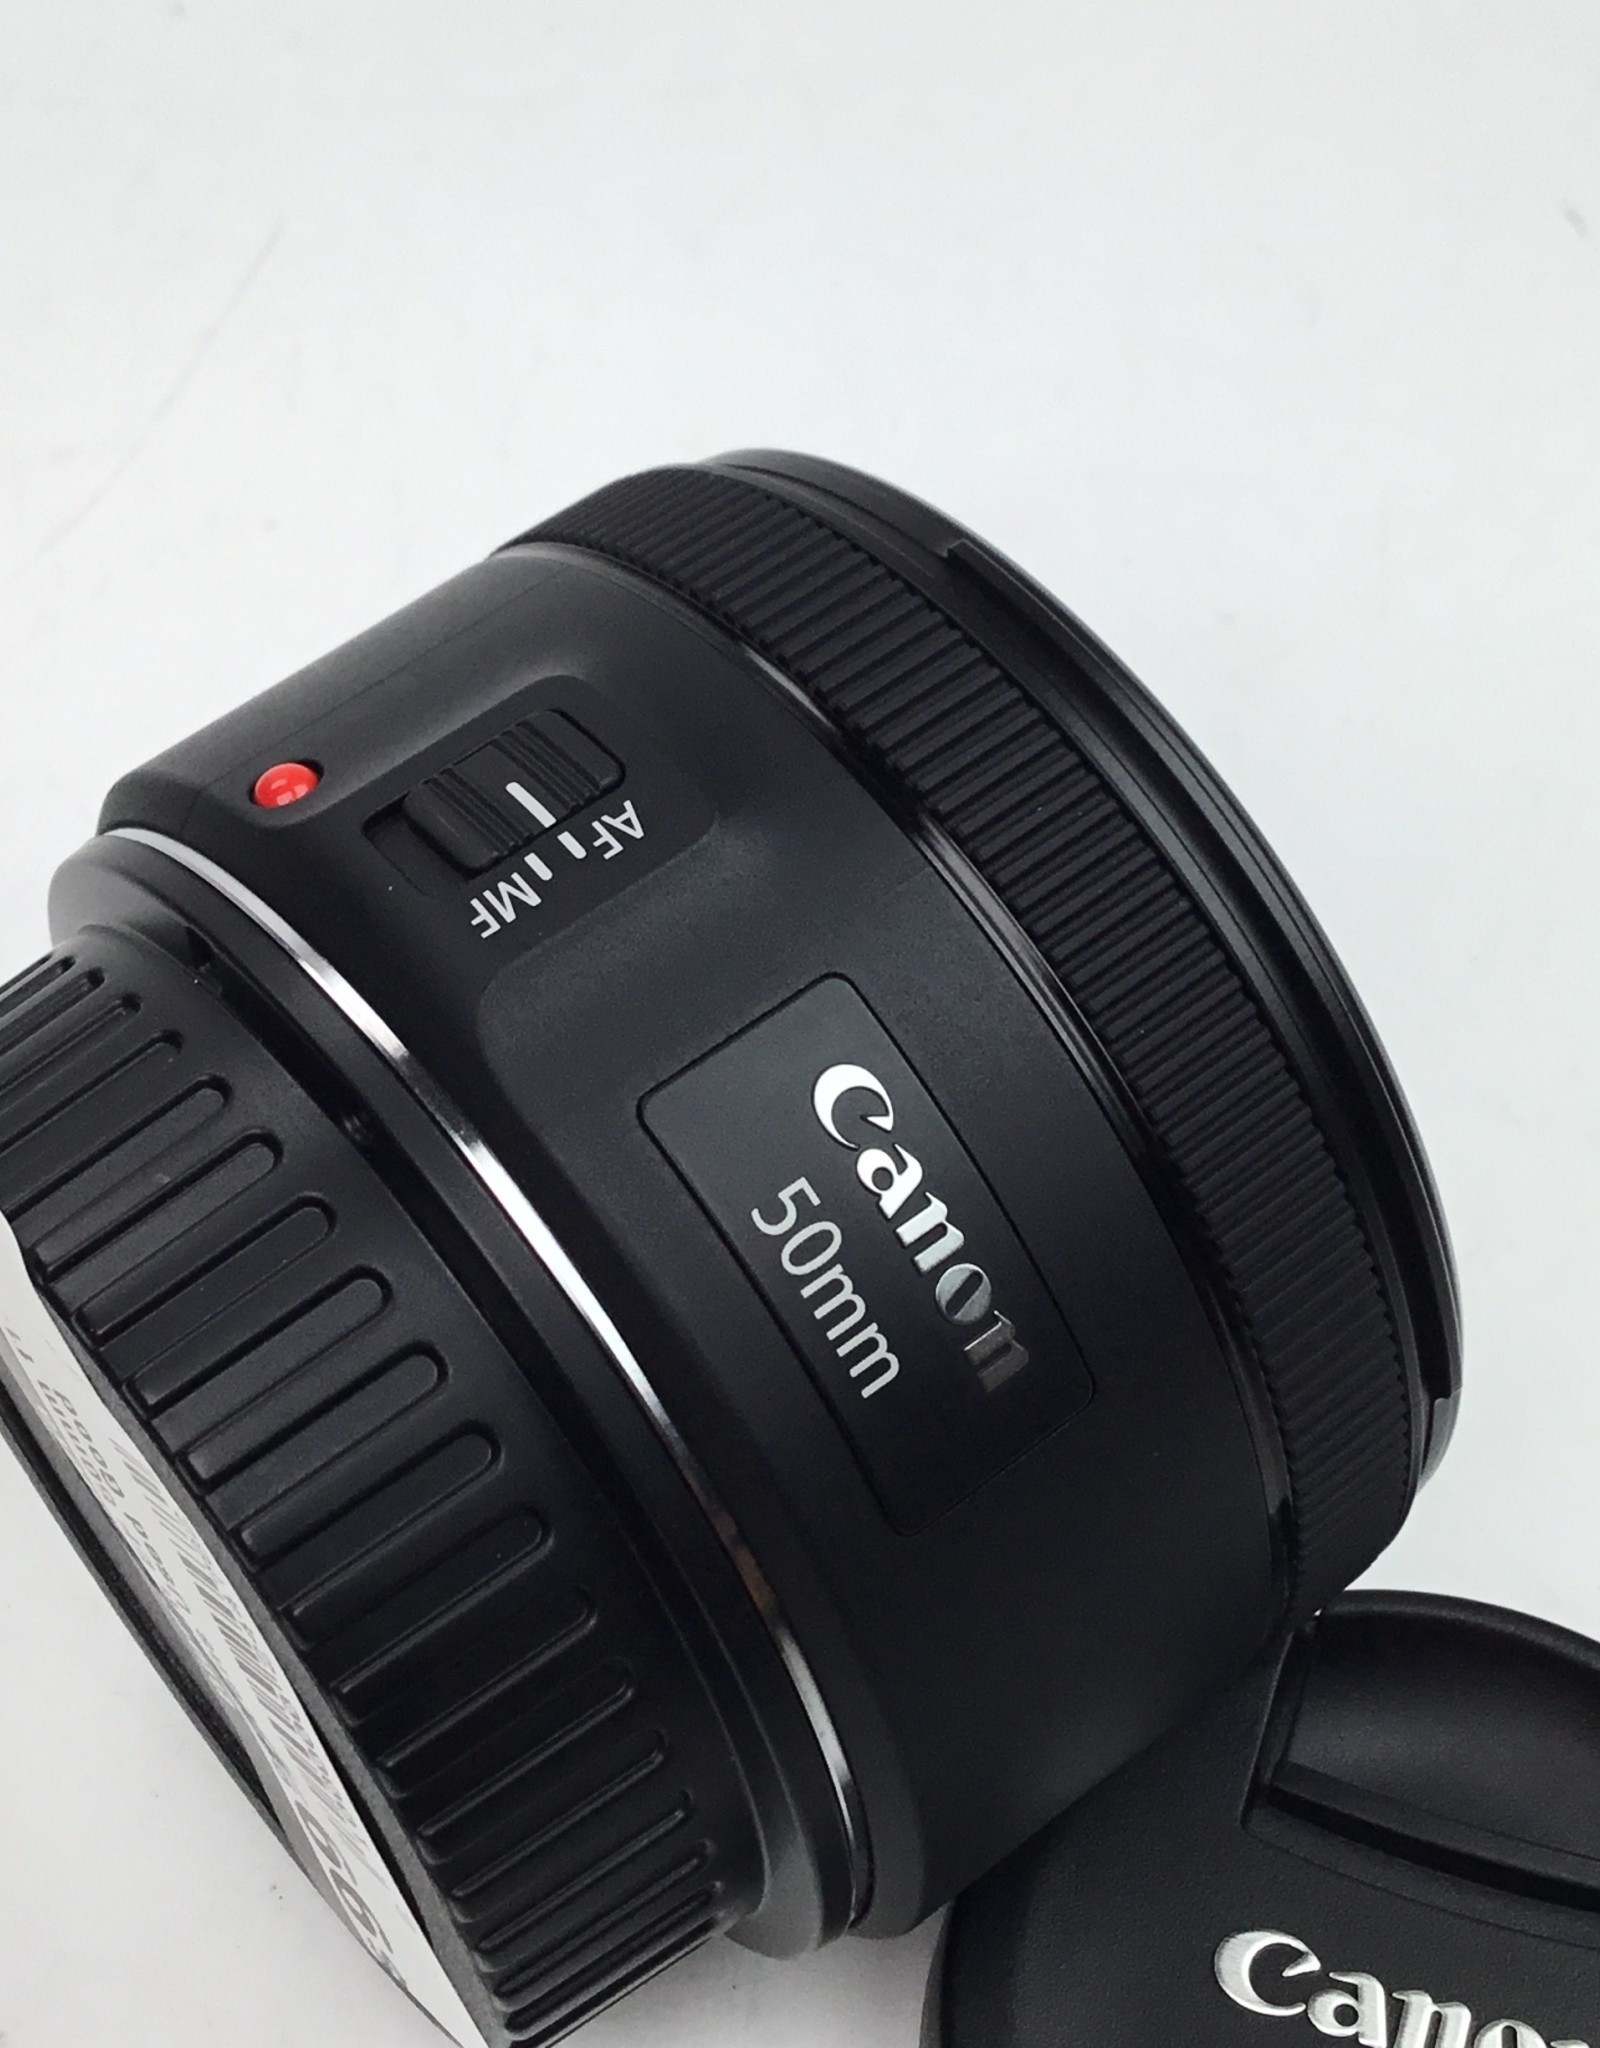 CANON Canon EF 50mm f1.8 STM Lens Used Good